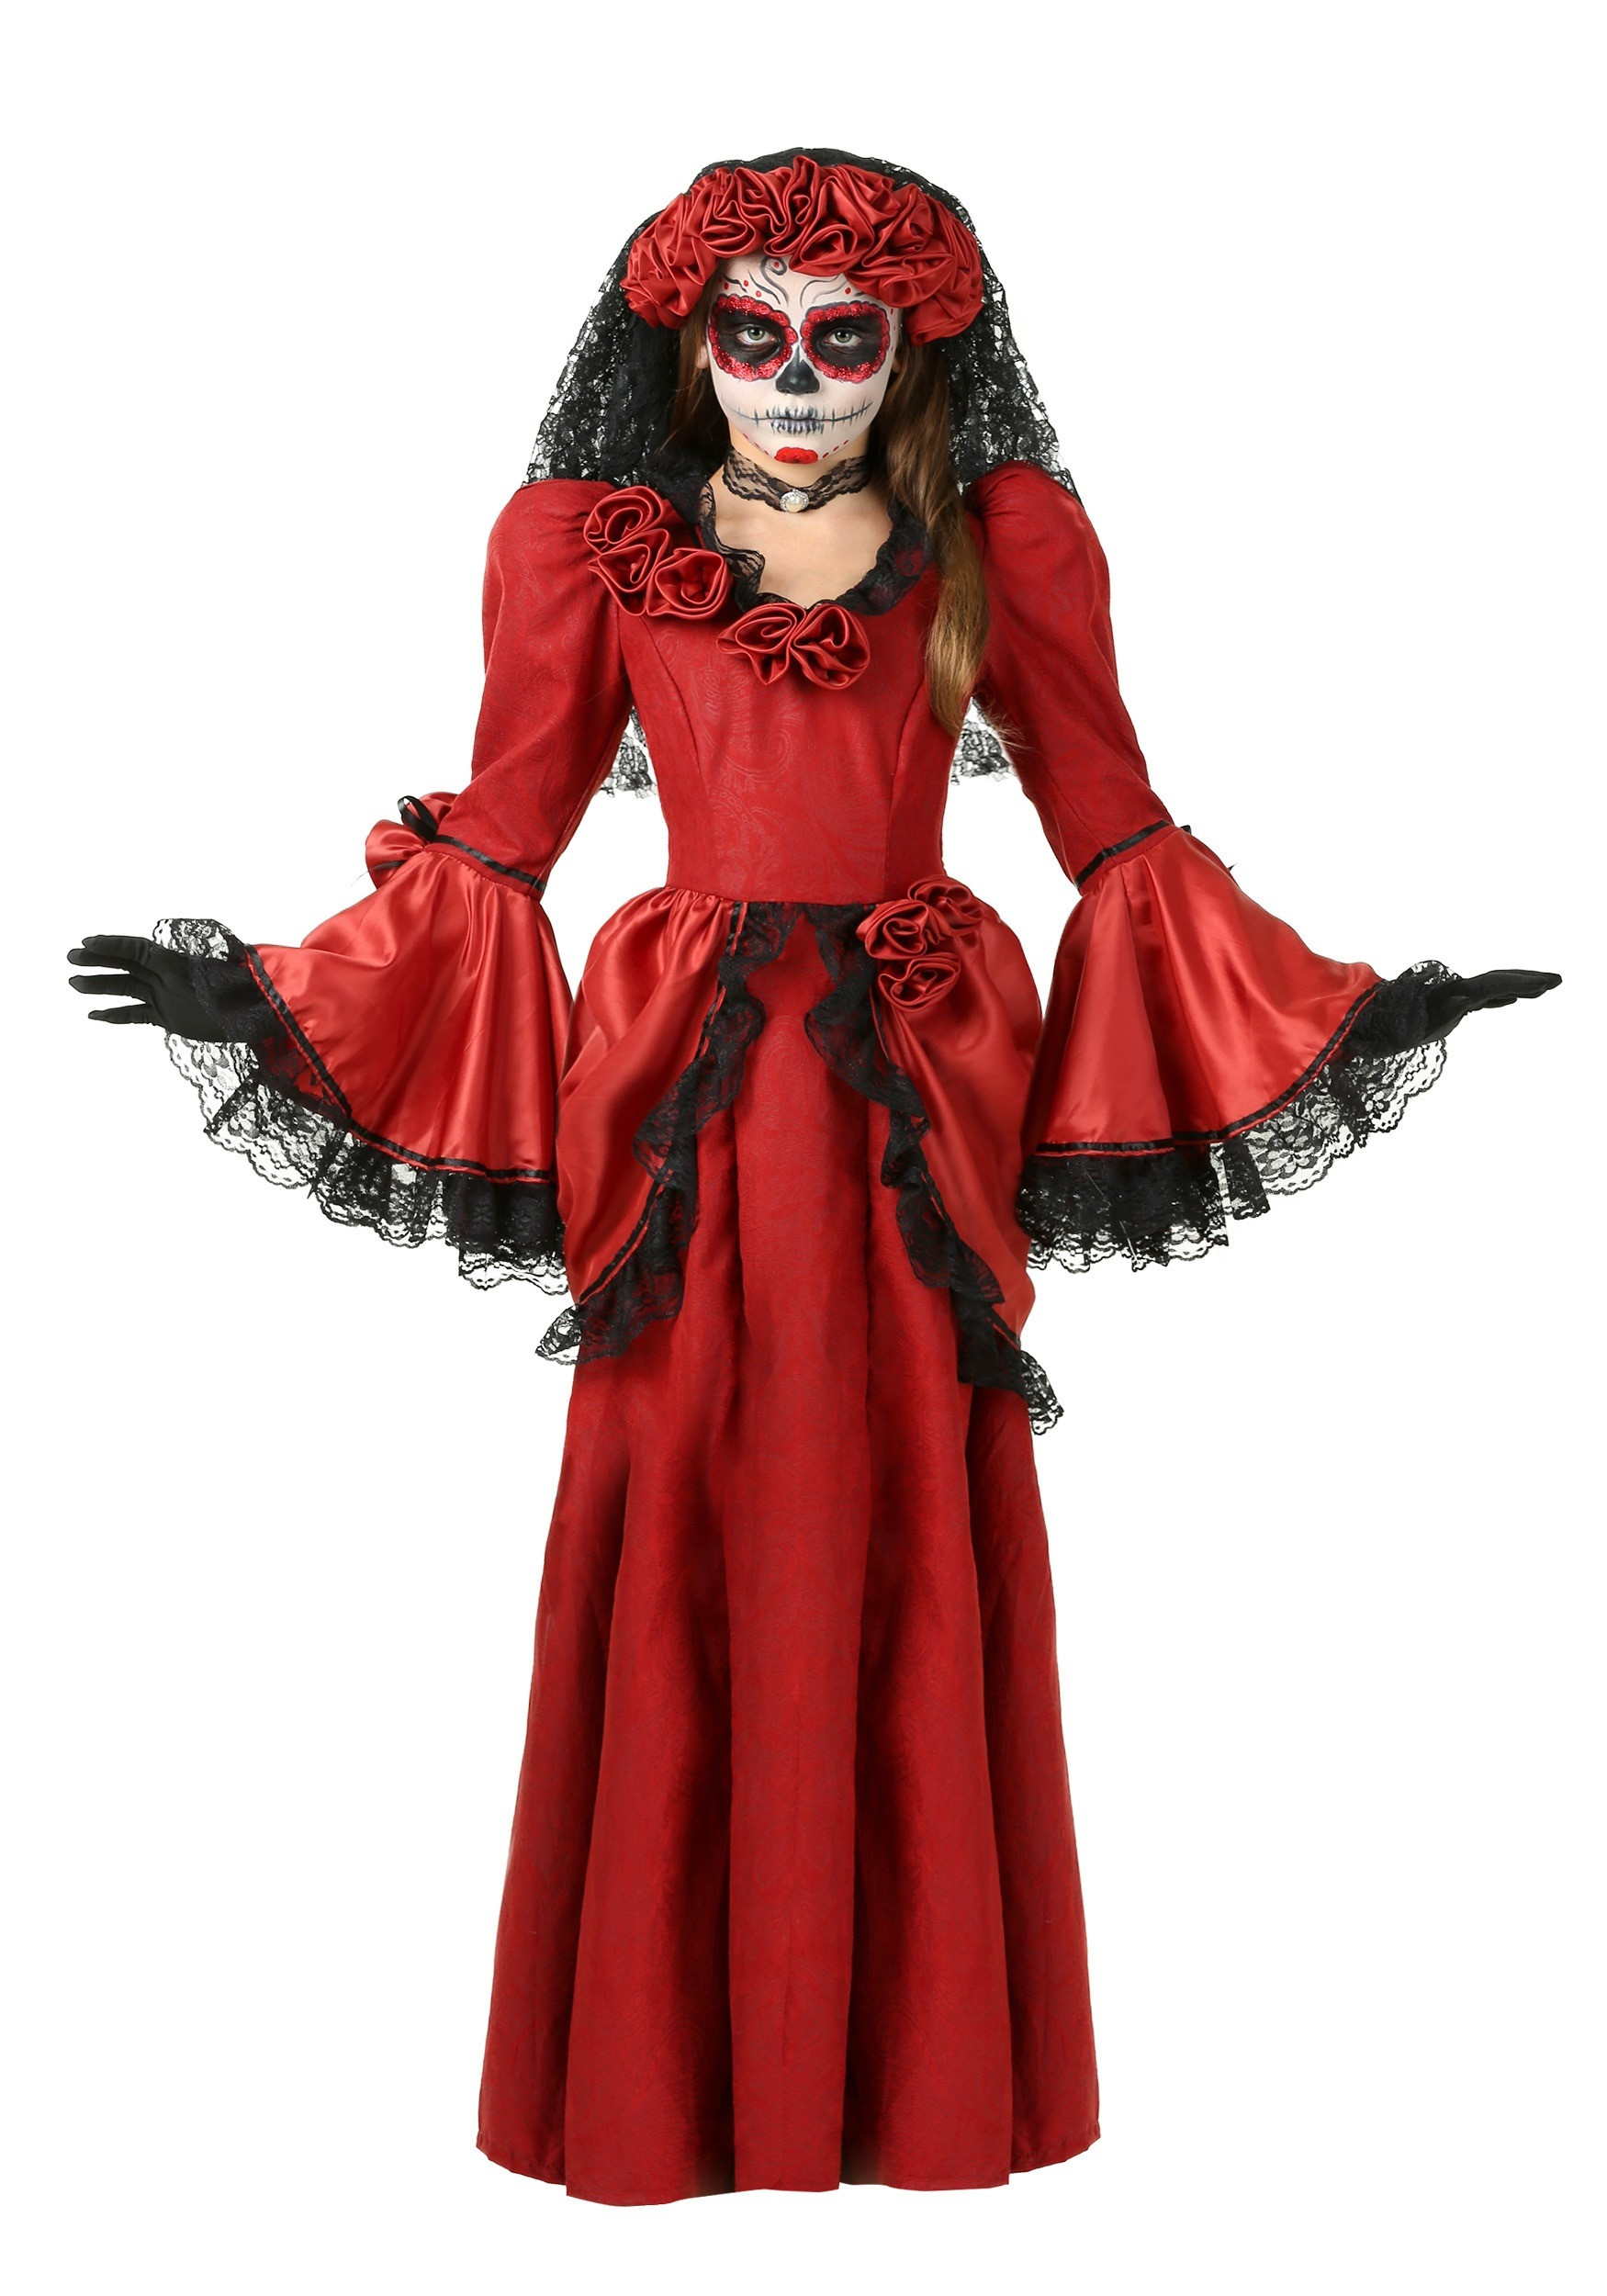 Day Of The Dead Halloween Costume Ideas
 Girl s Day of the Dead Costume